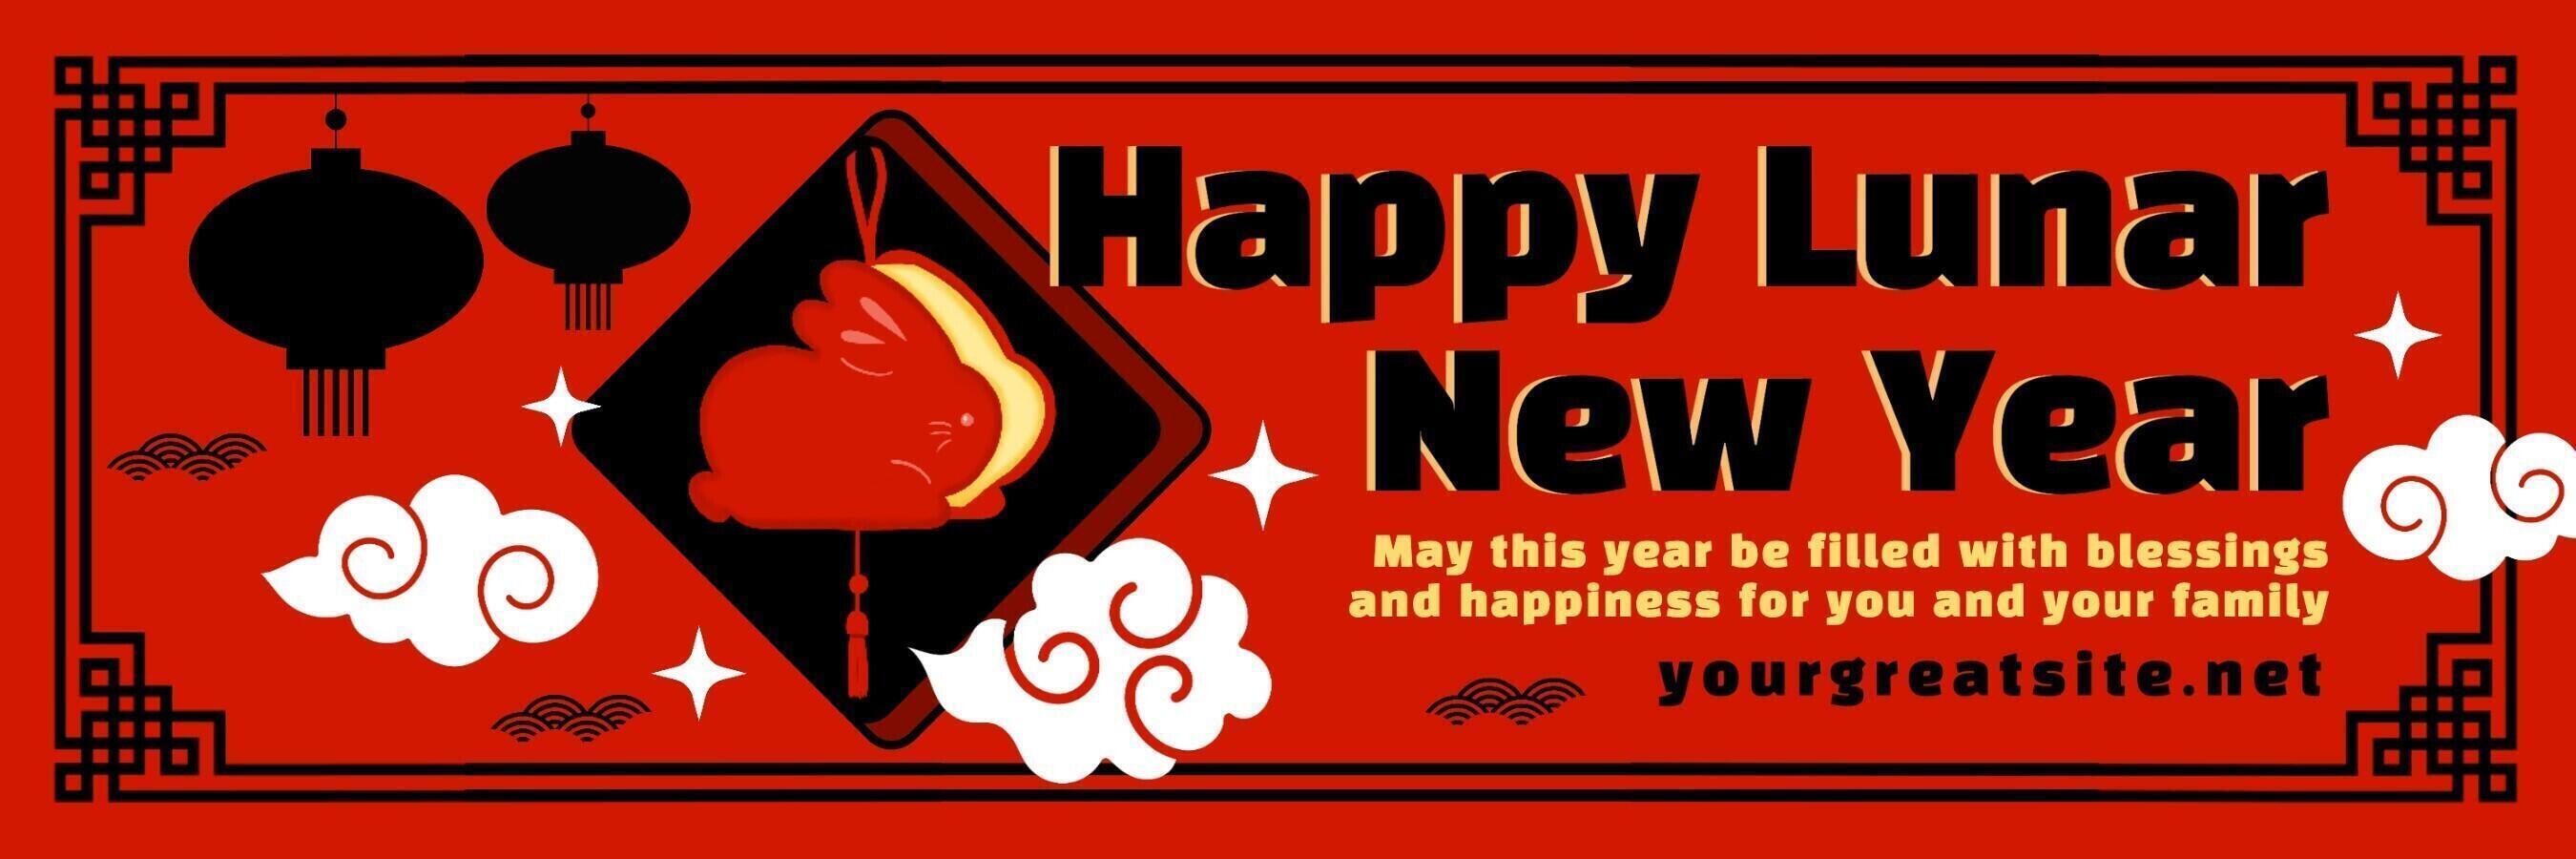 Happy Lunar New Year Greeting Template for Twitter Header